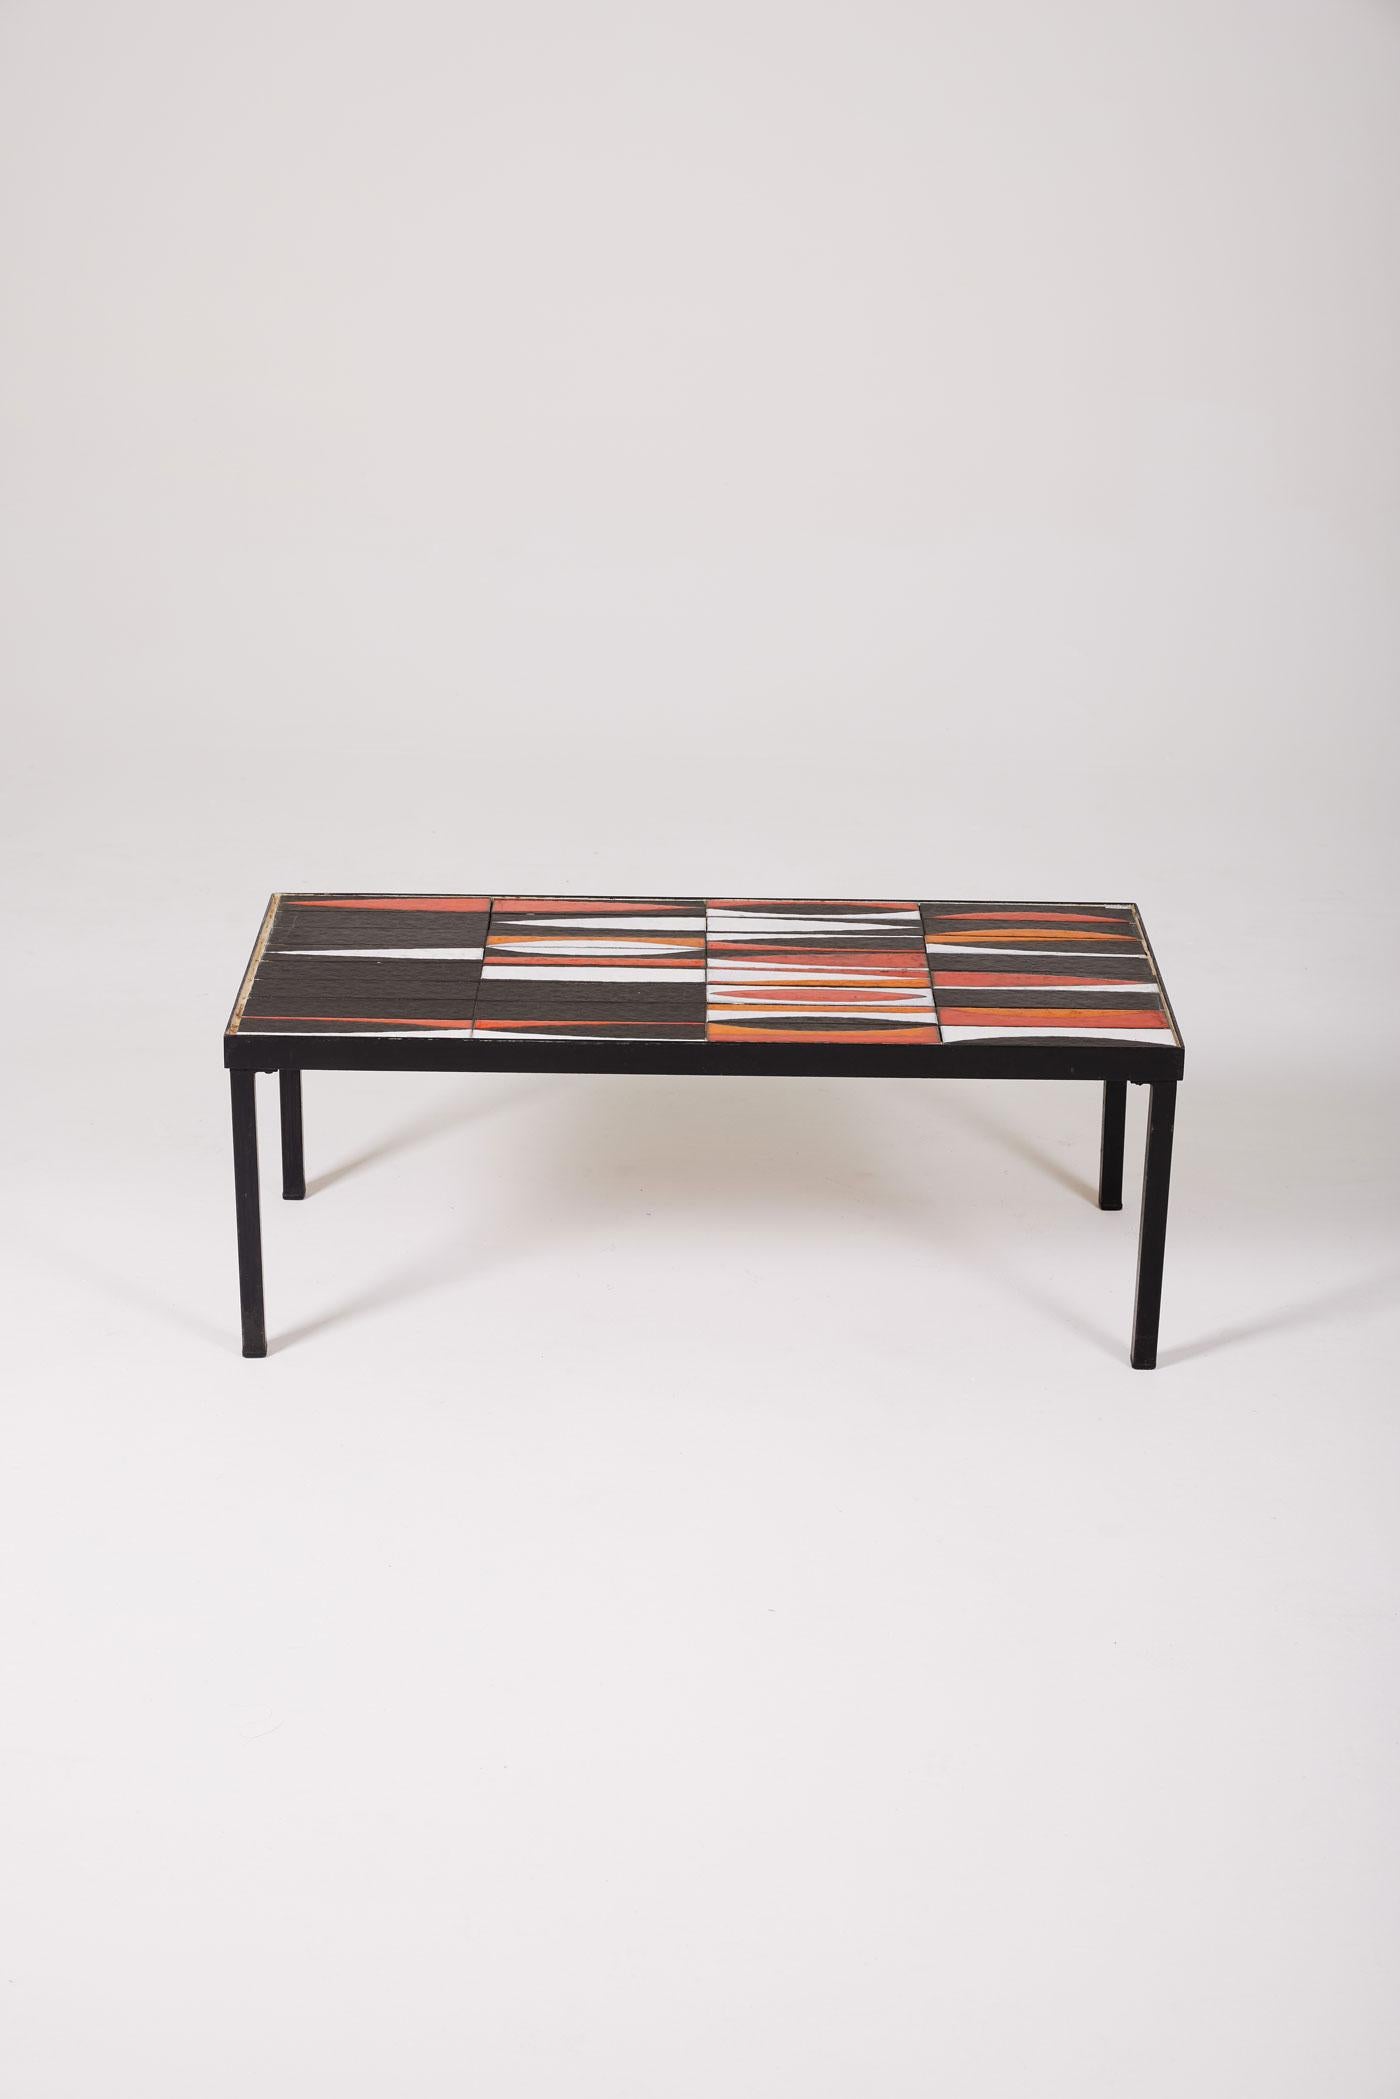 Roger Capron coffee table 1